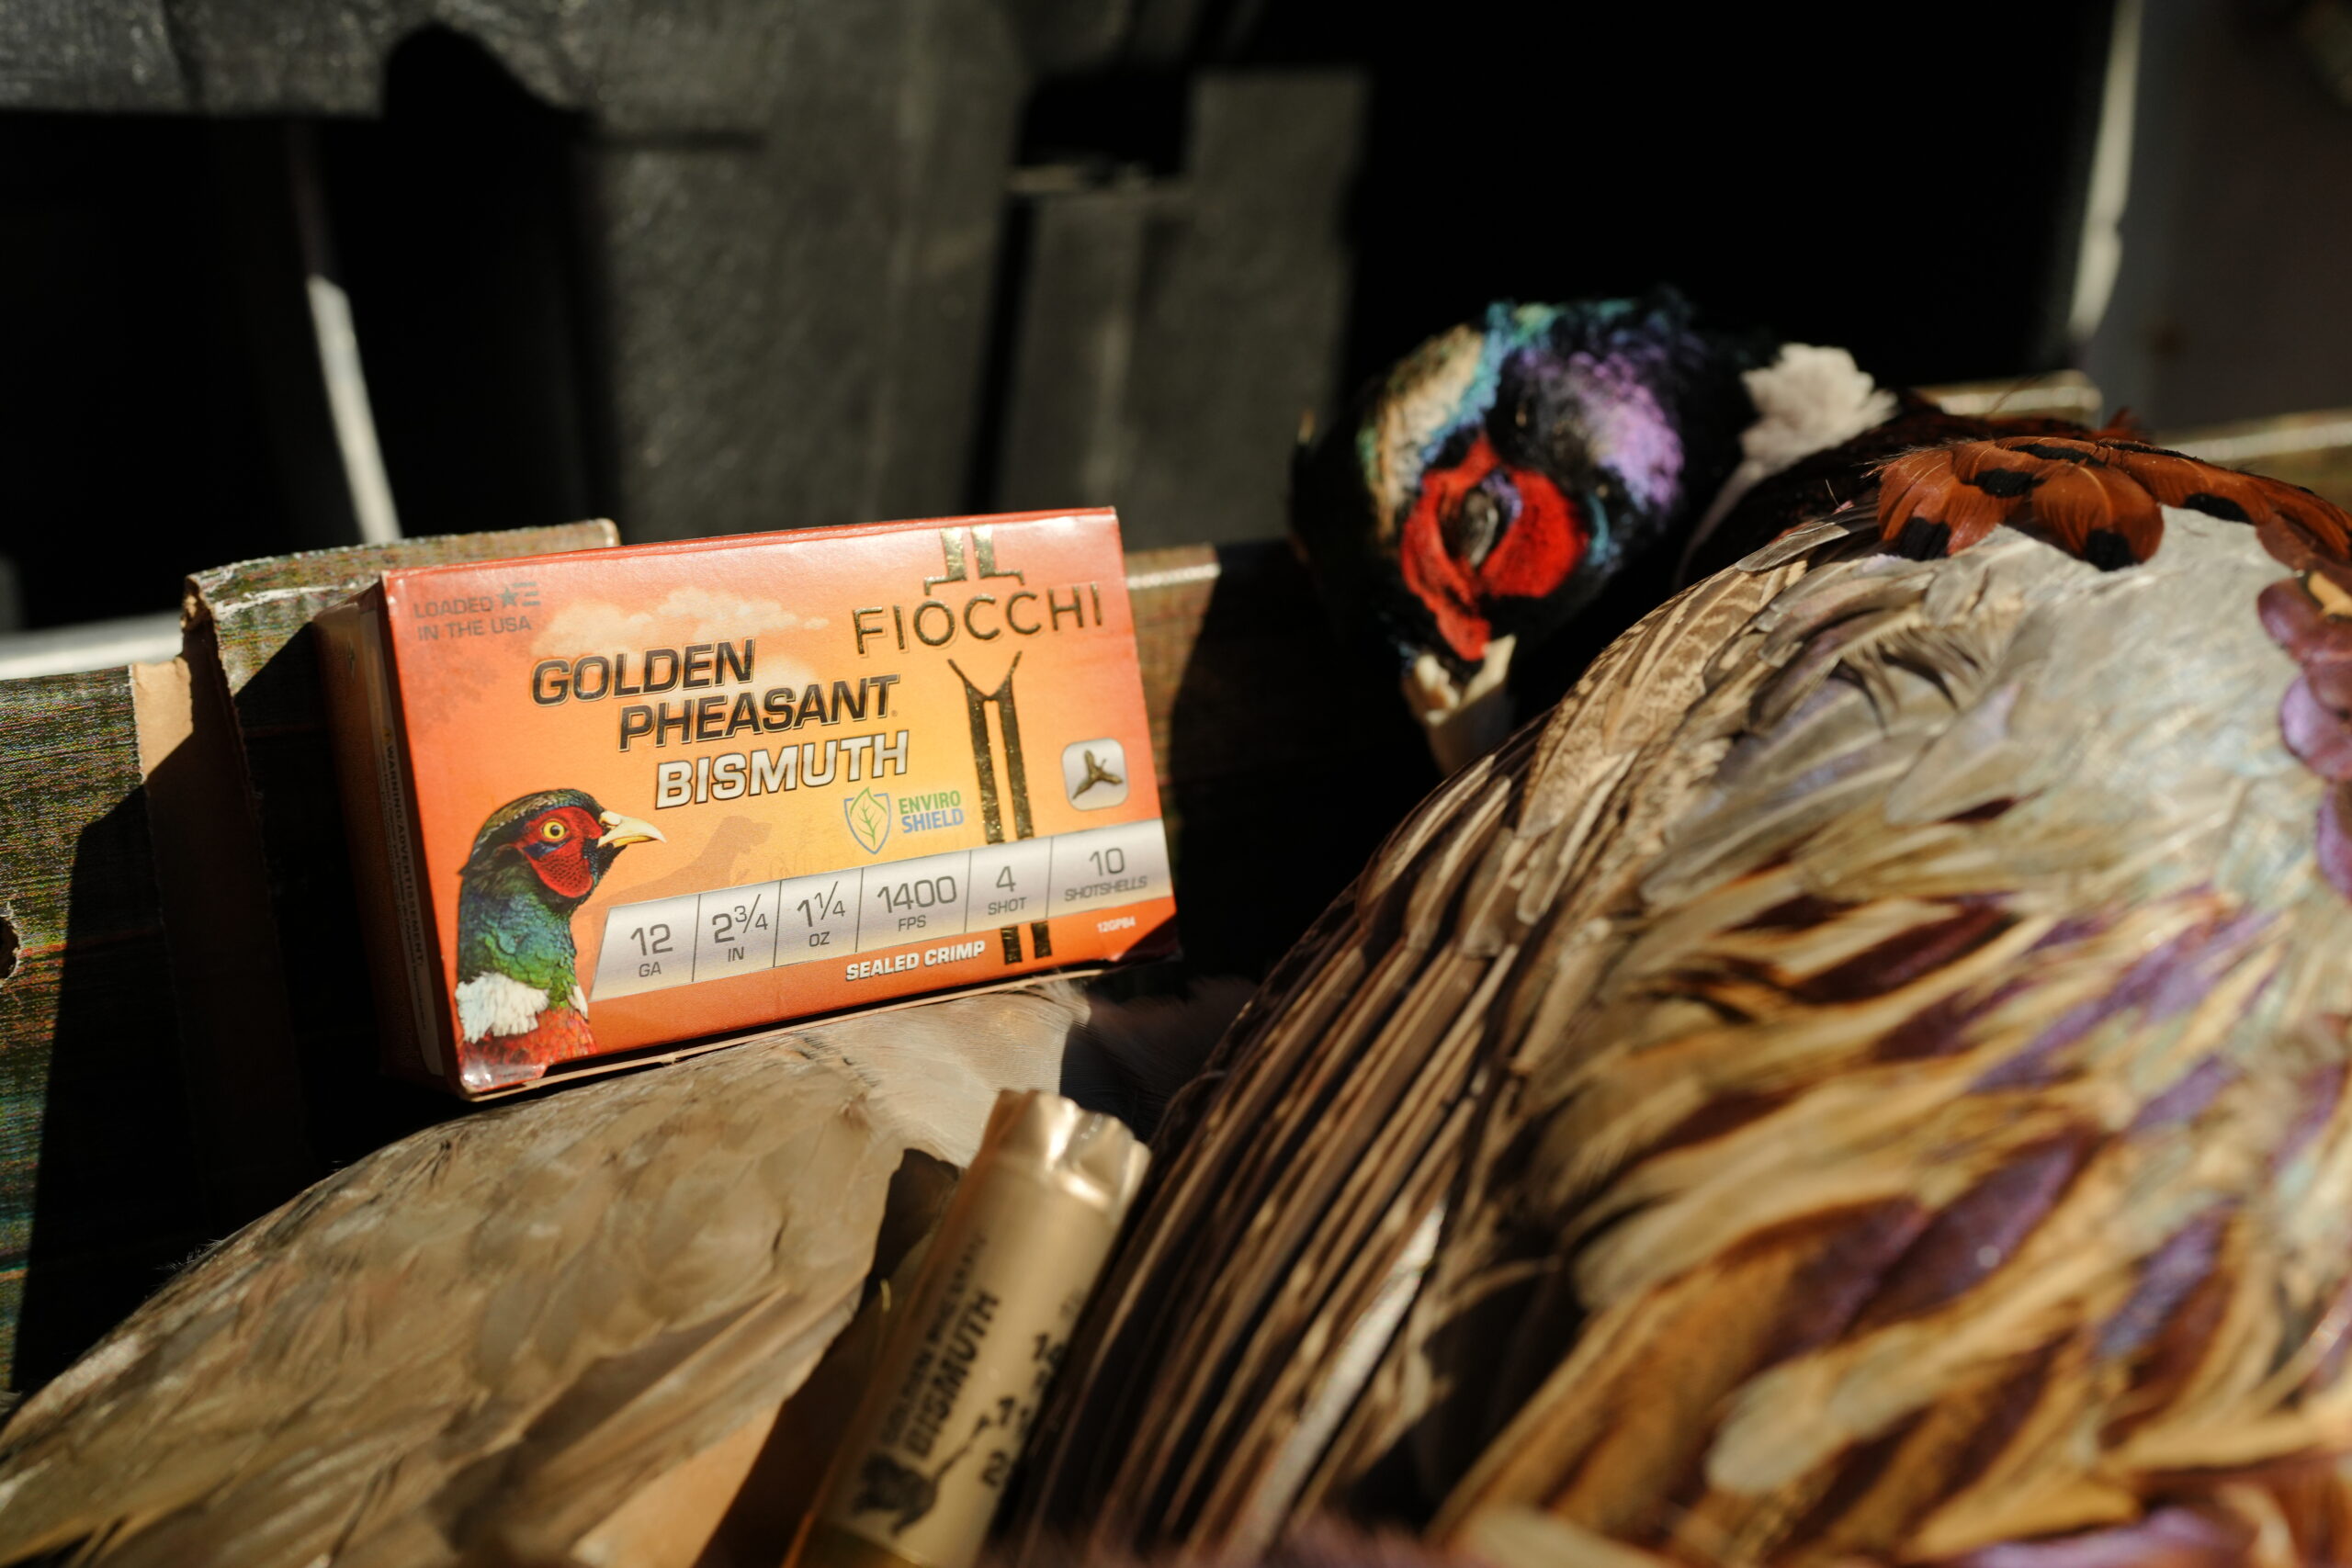 Fiocchi Bismuth Pheasant Ammunition: Elevating the Hunt with Innovation